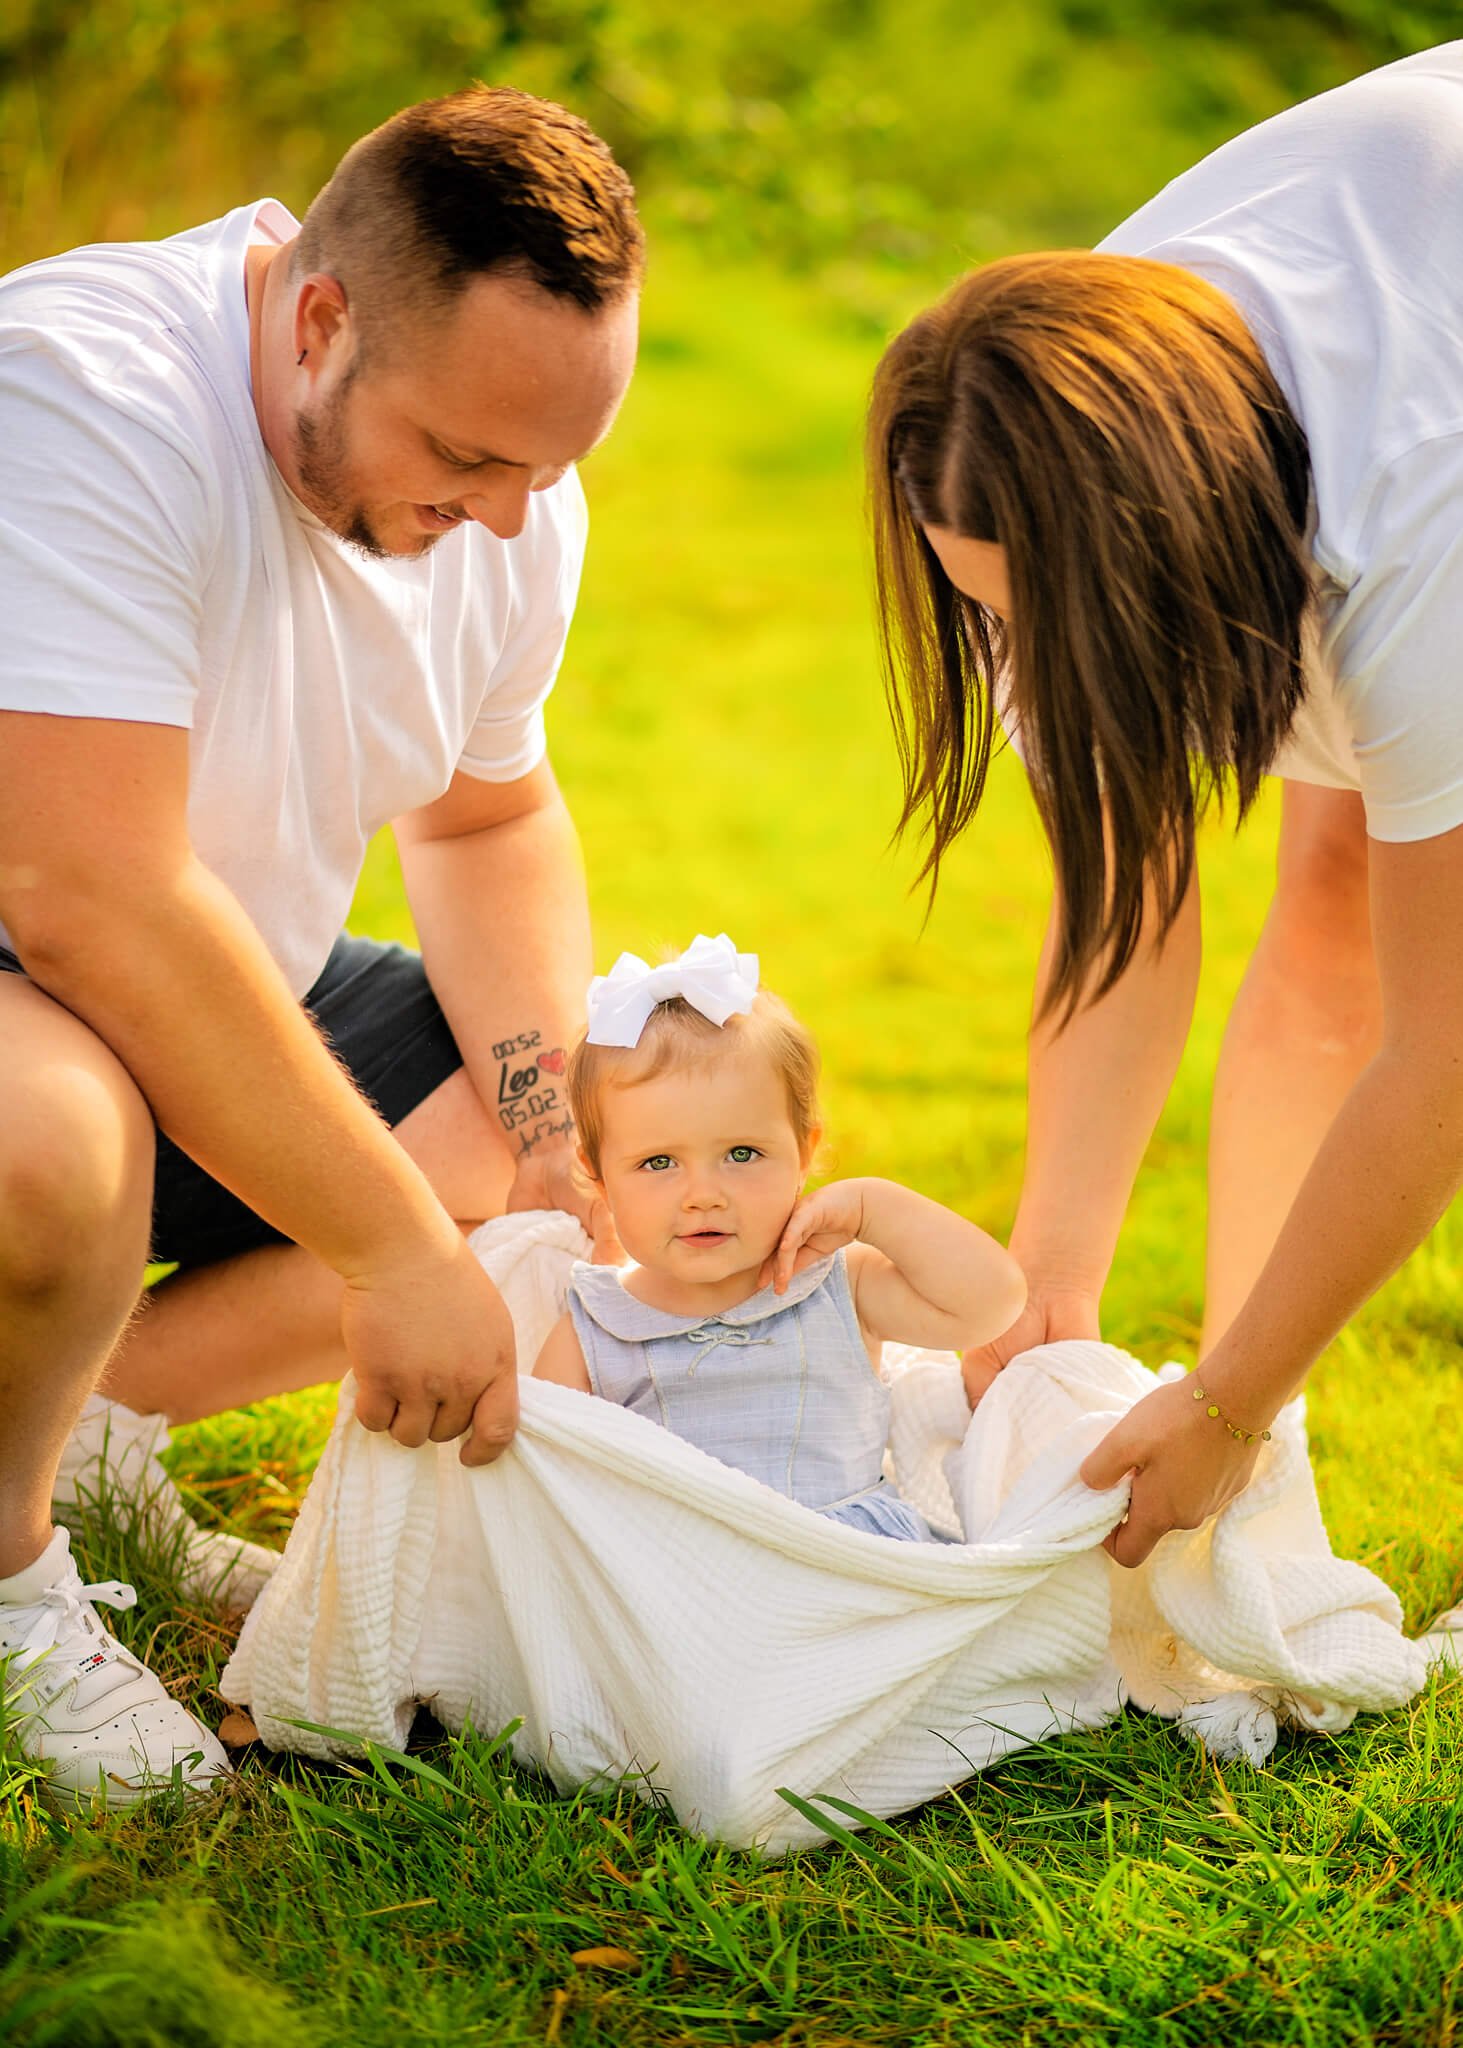 Toddler girl with a bow in her hair sitting on a blanket, flanked by her doting parents in a sunlit grassy field during a family photoshoot for kids.